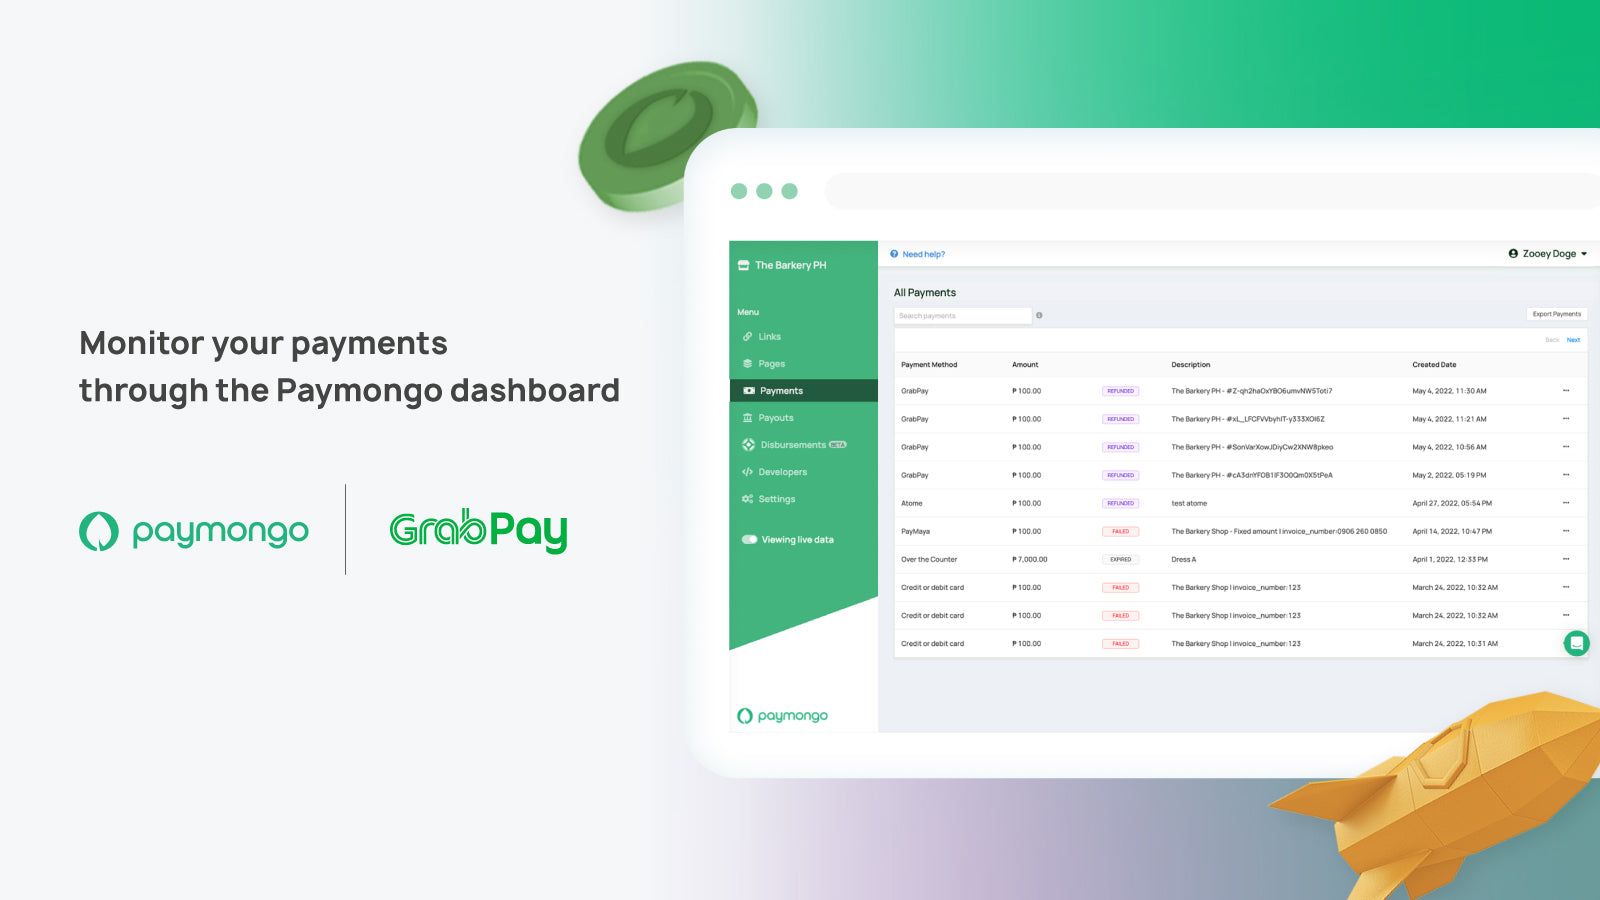 Monitor your payments through the Paymongo dashboard.